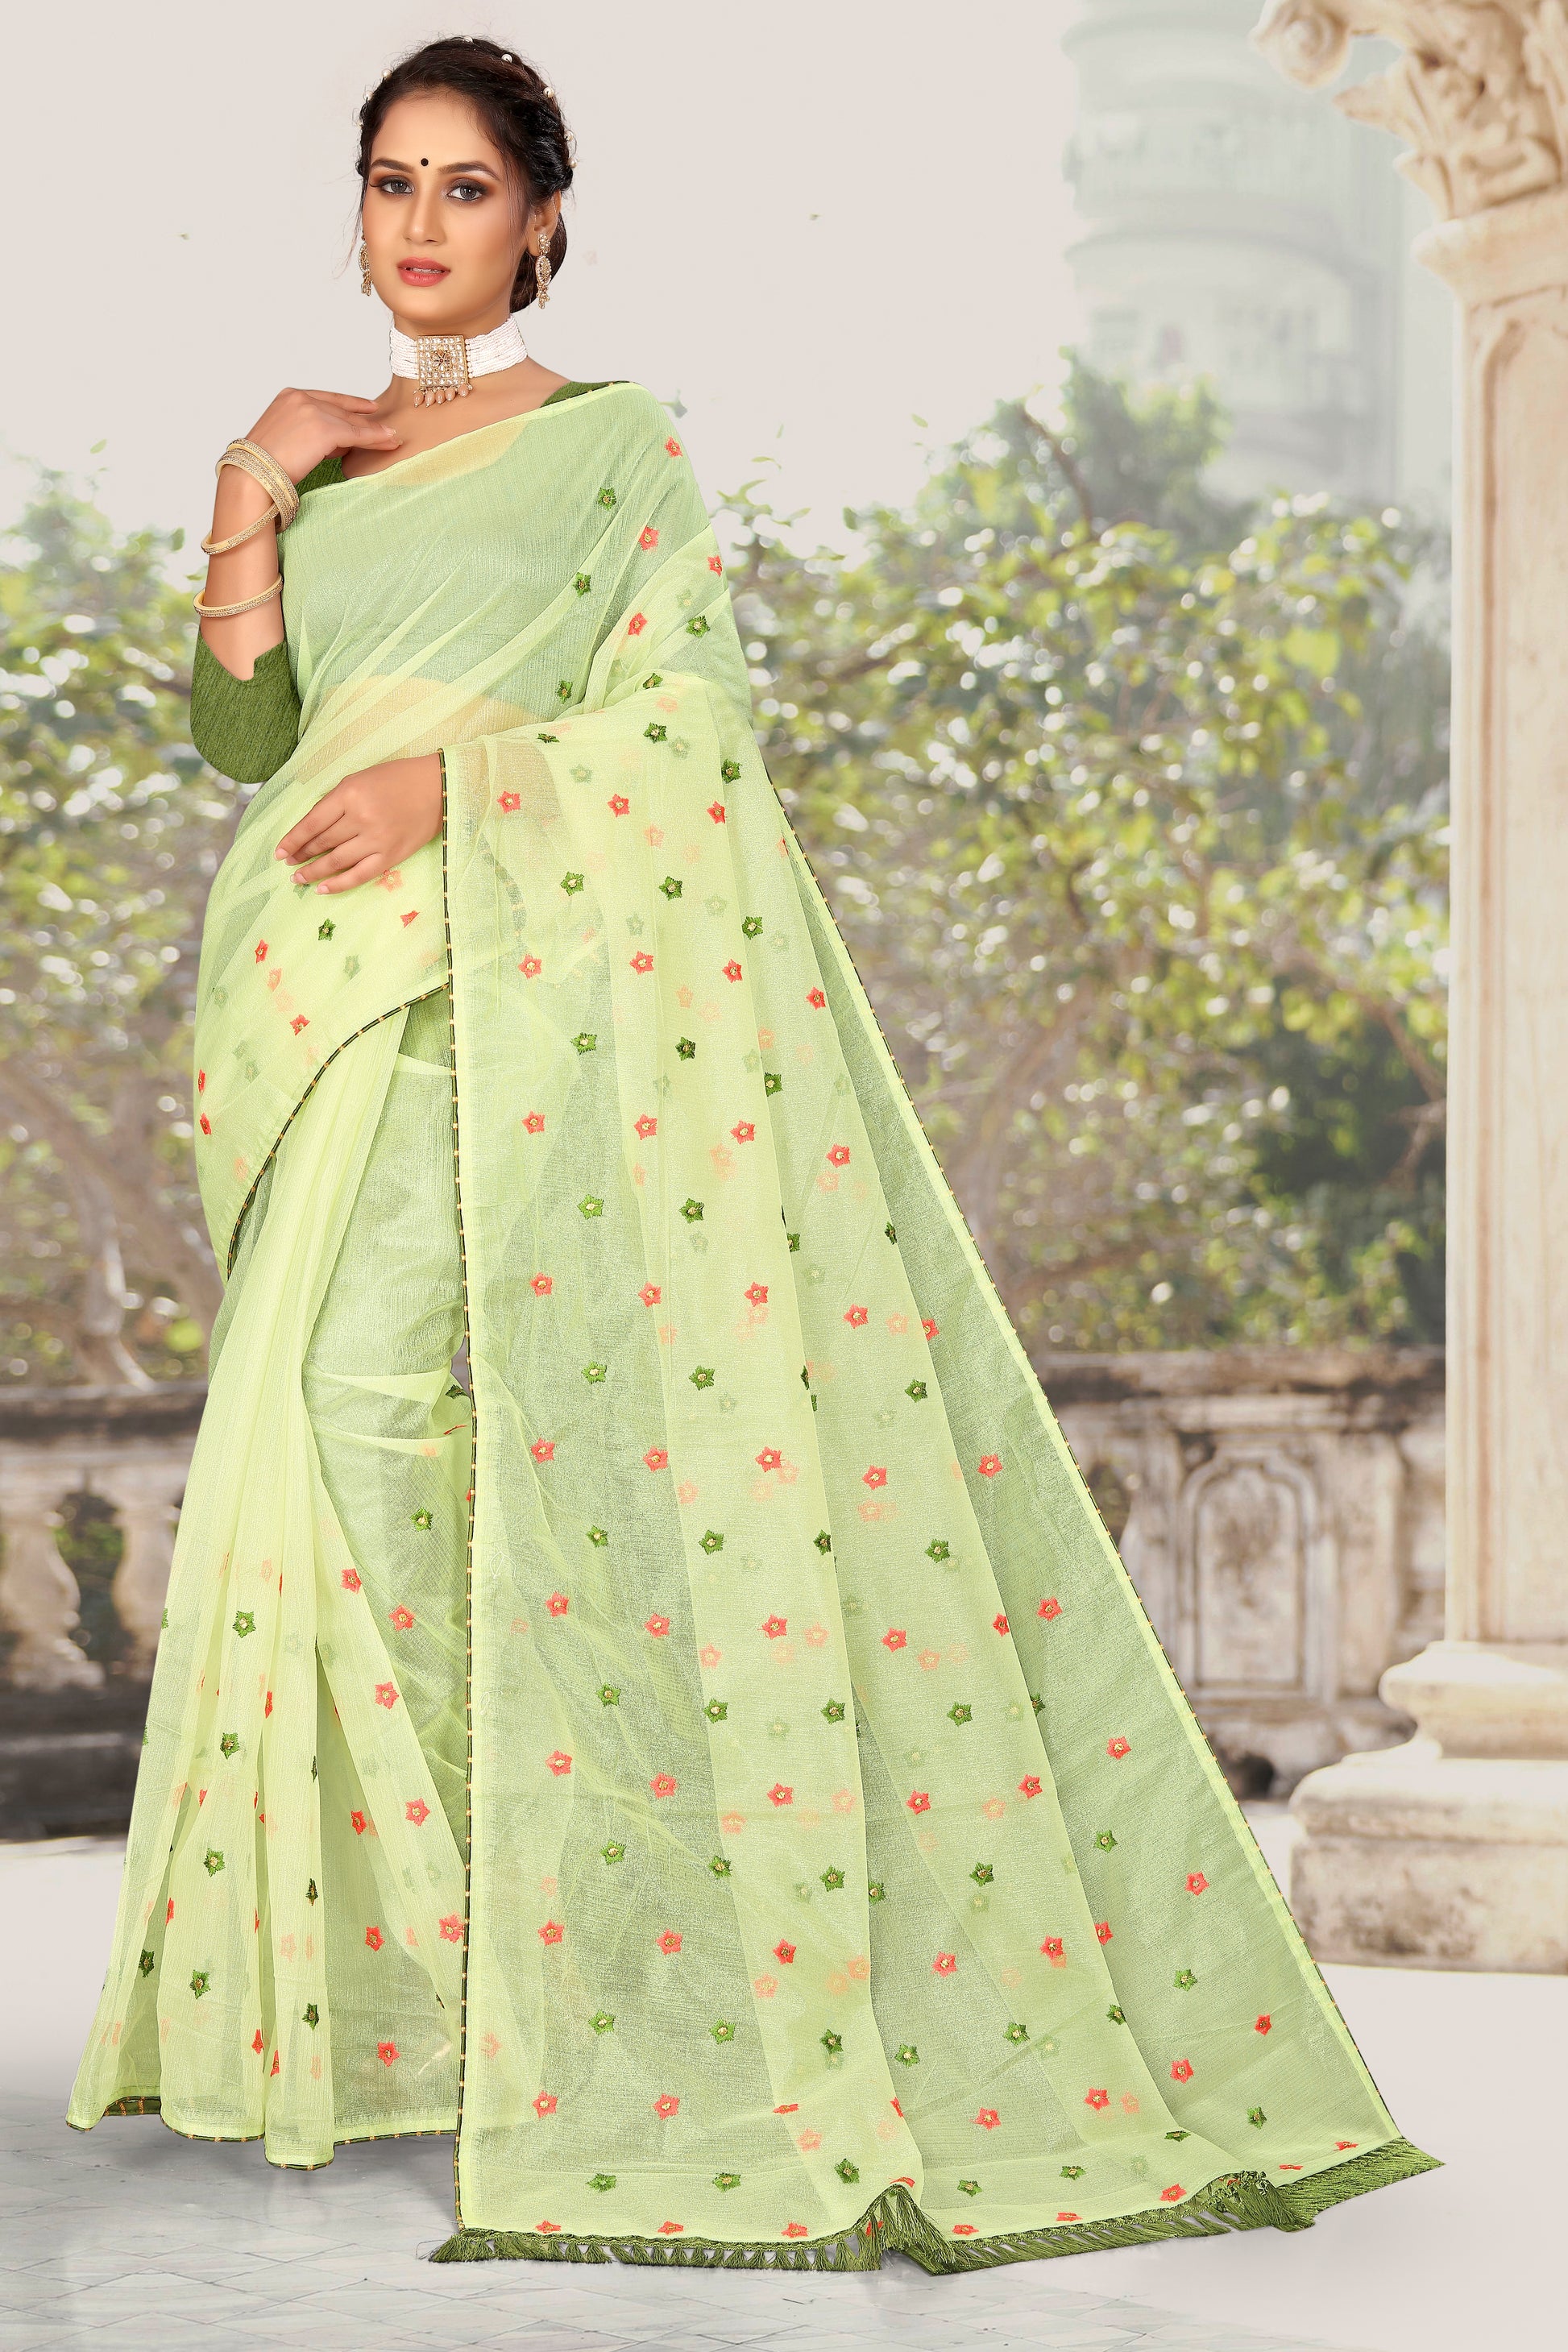 OFFICIAL ORGANZA COTTON WITH WORK IN WHOLE SAREE FOR ALL FORMAL OCCASIONS WITH GREEN SHADE